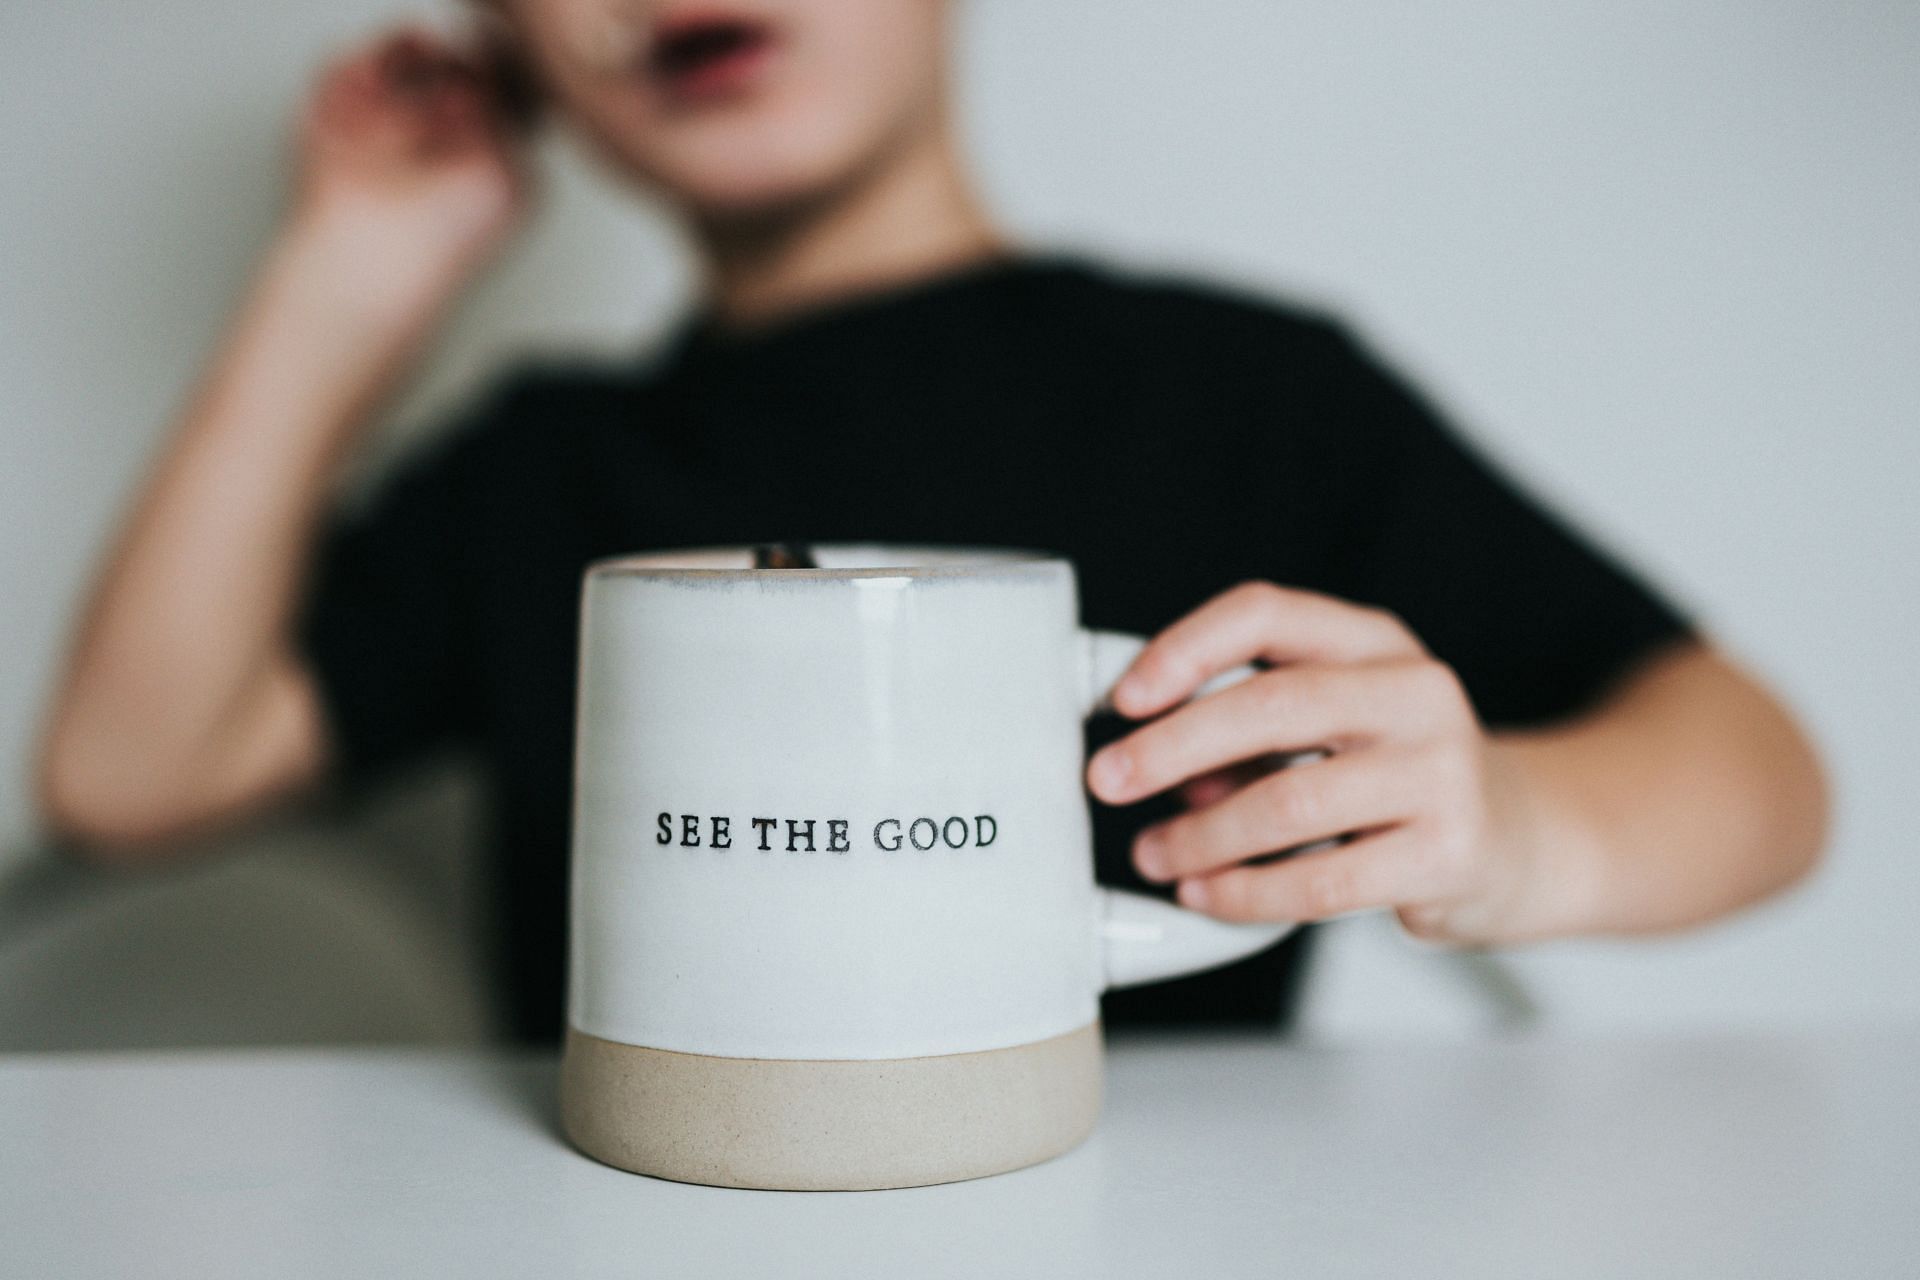 When you believe you can do good, you engage in good. (Image via Unsplash/Nathan Dumlao)